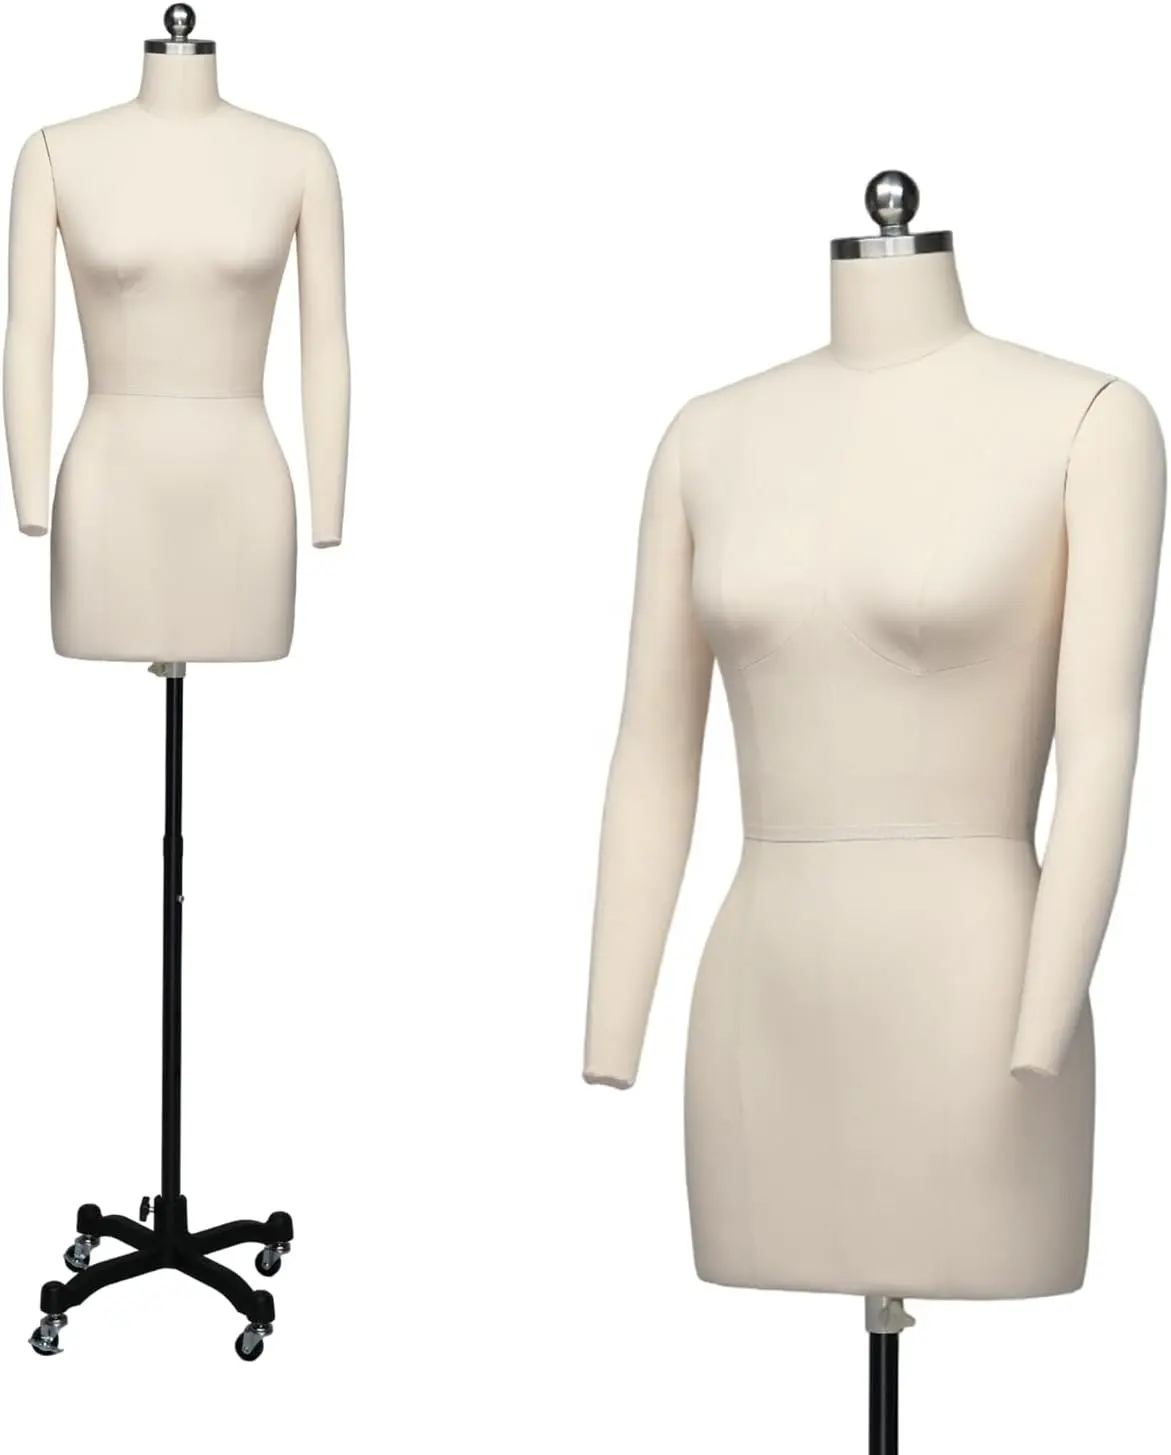 Female Sewing Mannequin, Size 6 Professional Dress Form for Display and Tailor Design, Height Adjustable Torso with Stable Metal